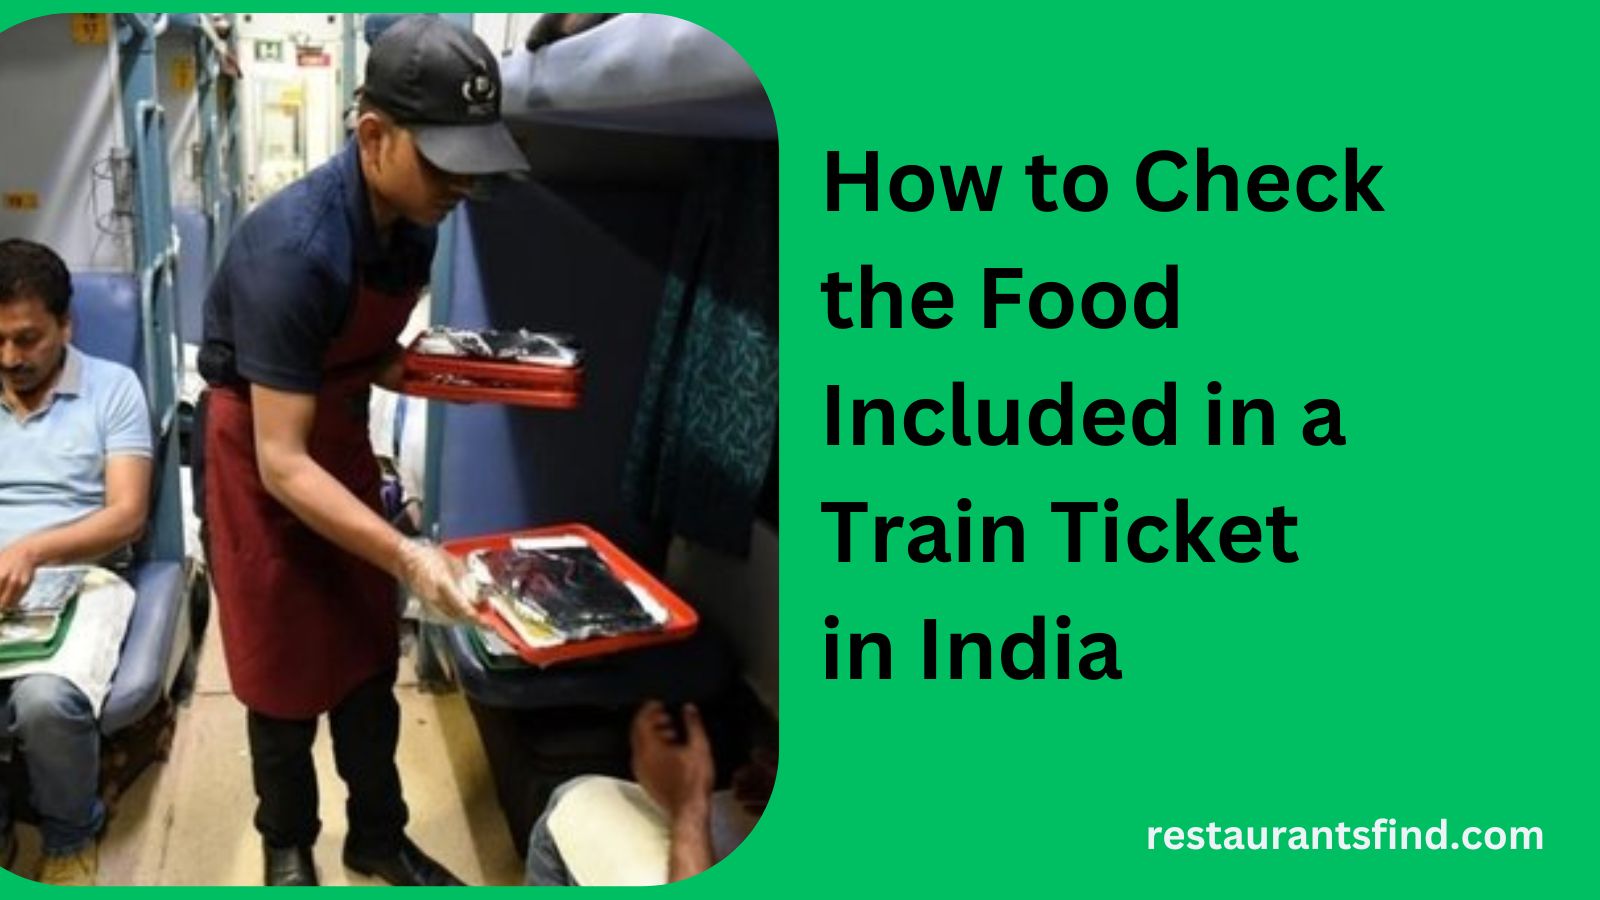 How to Check the Food Included in a Train Ticket in India